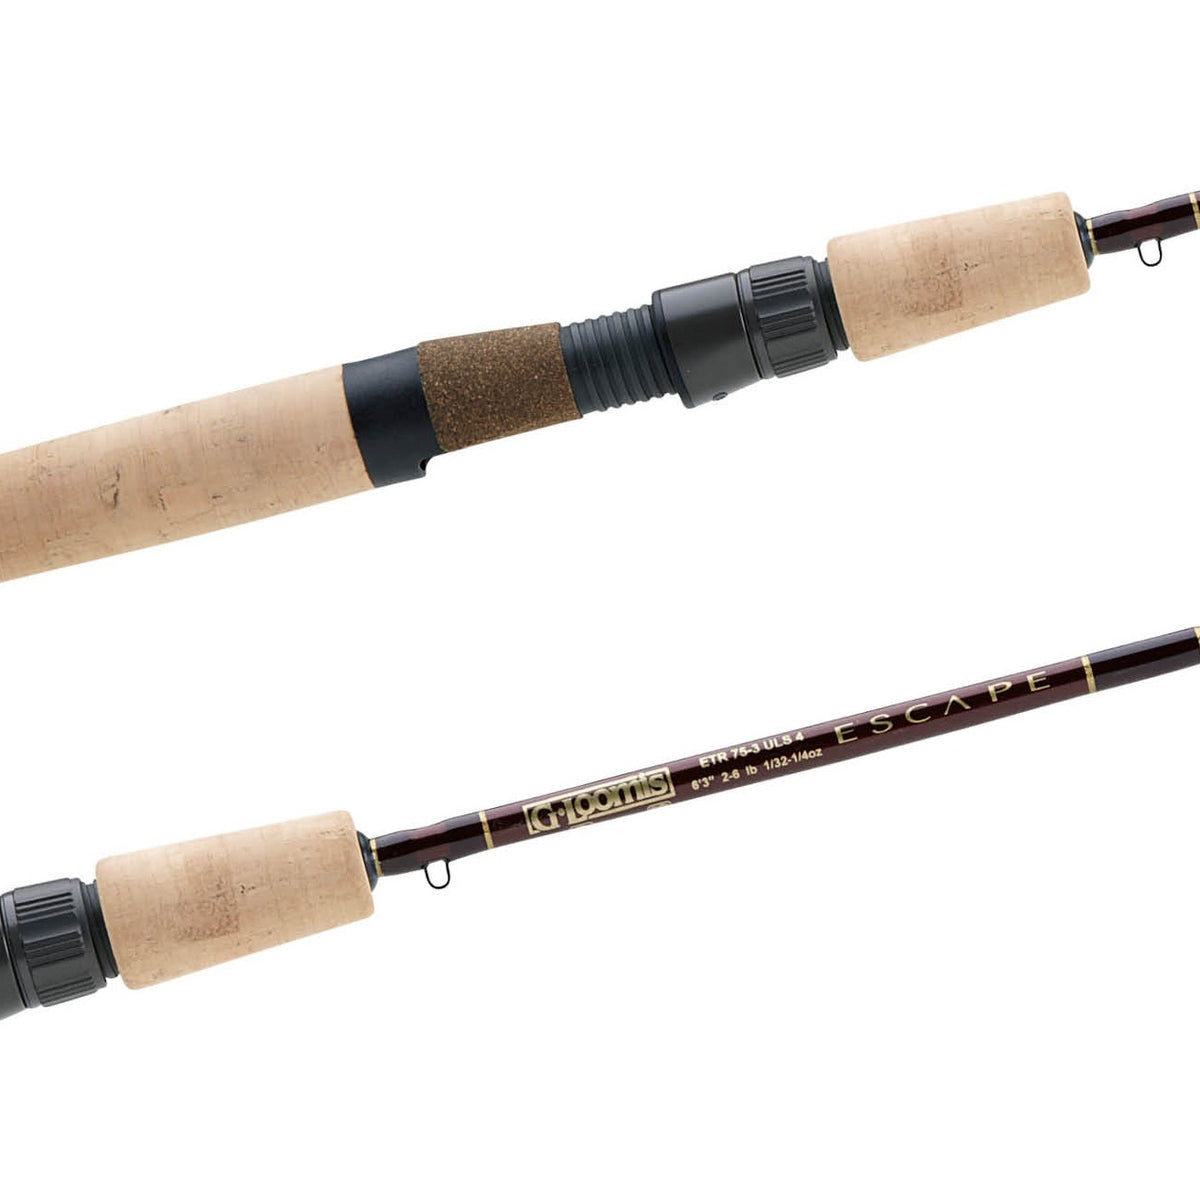 Reel Seats, Rod Grips, Exotic Cork, Fly Rod Guides